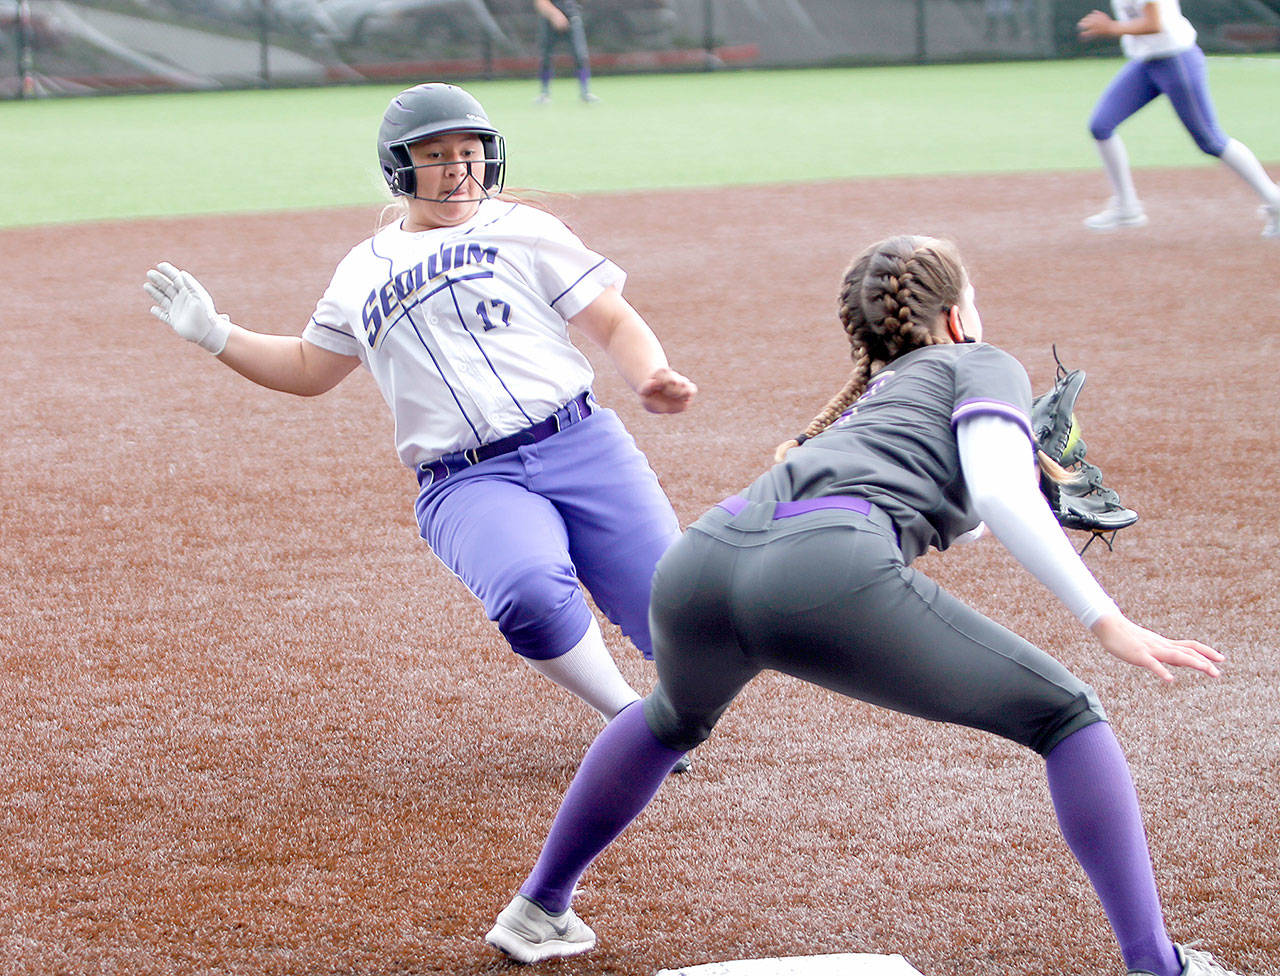 Sequim’s Lily Fili slides into third base against North Kitsap at the Olympic League tournament in Silverdale on May 1. North Kitsap edged the Wolves, 2-1. Photo by Mark Krulish/Kitsap News Group